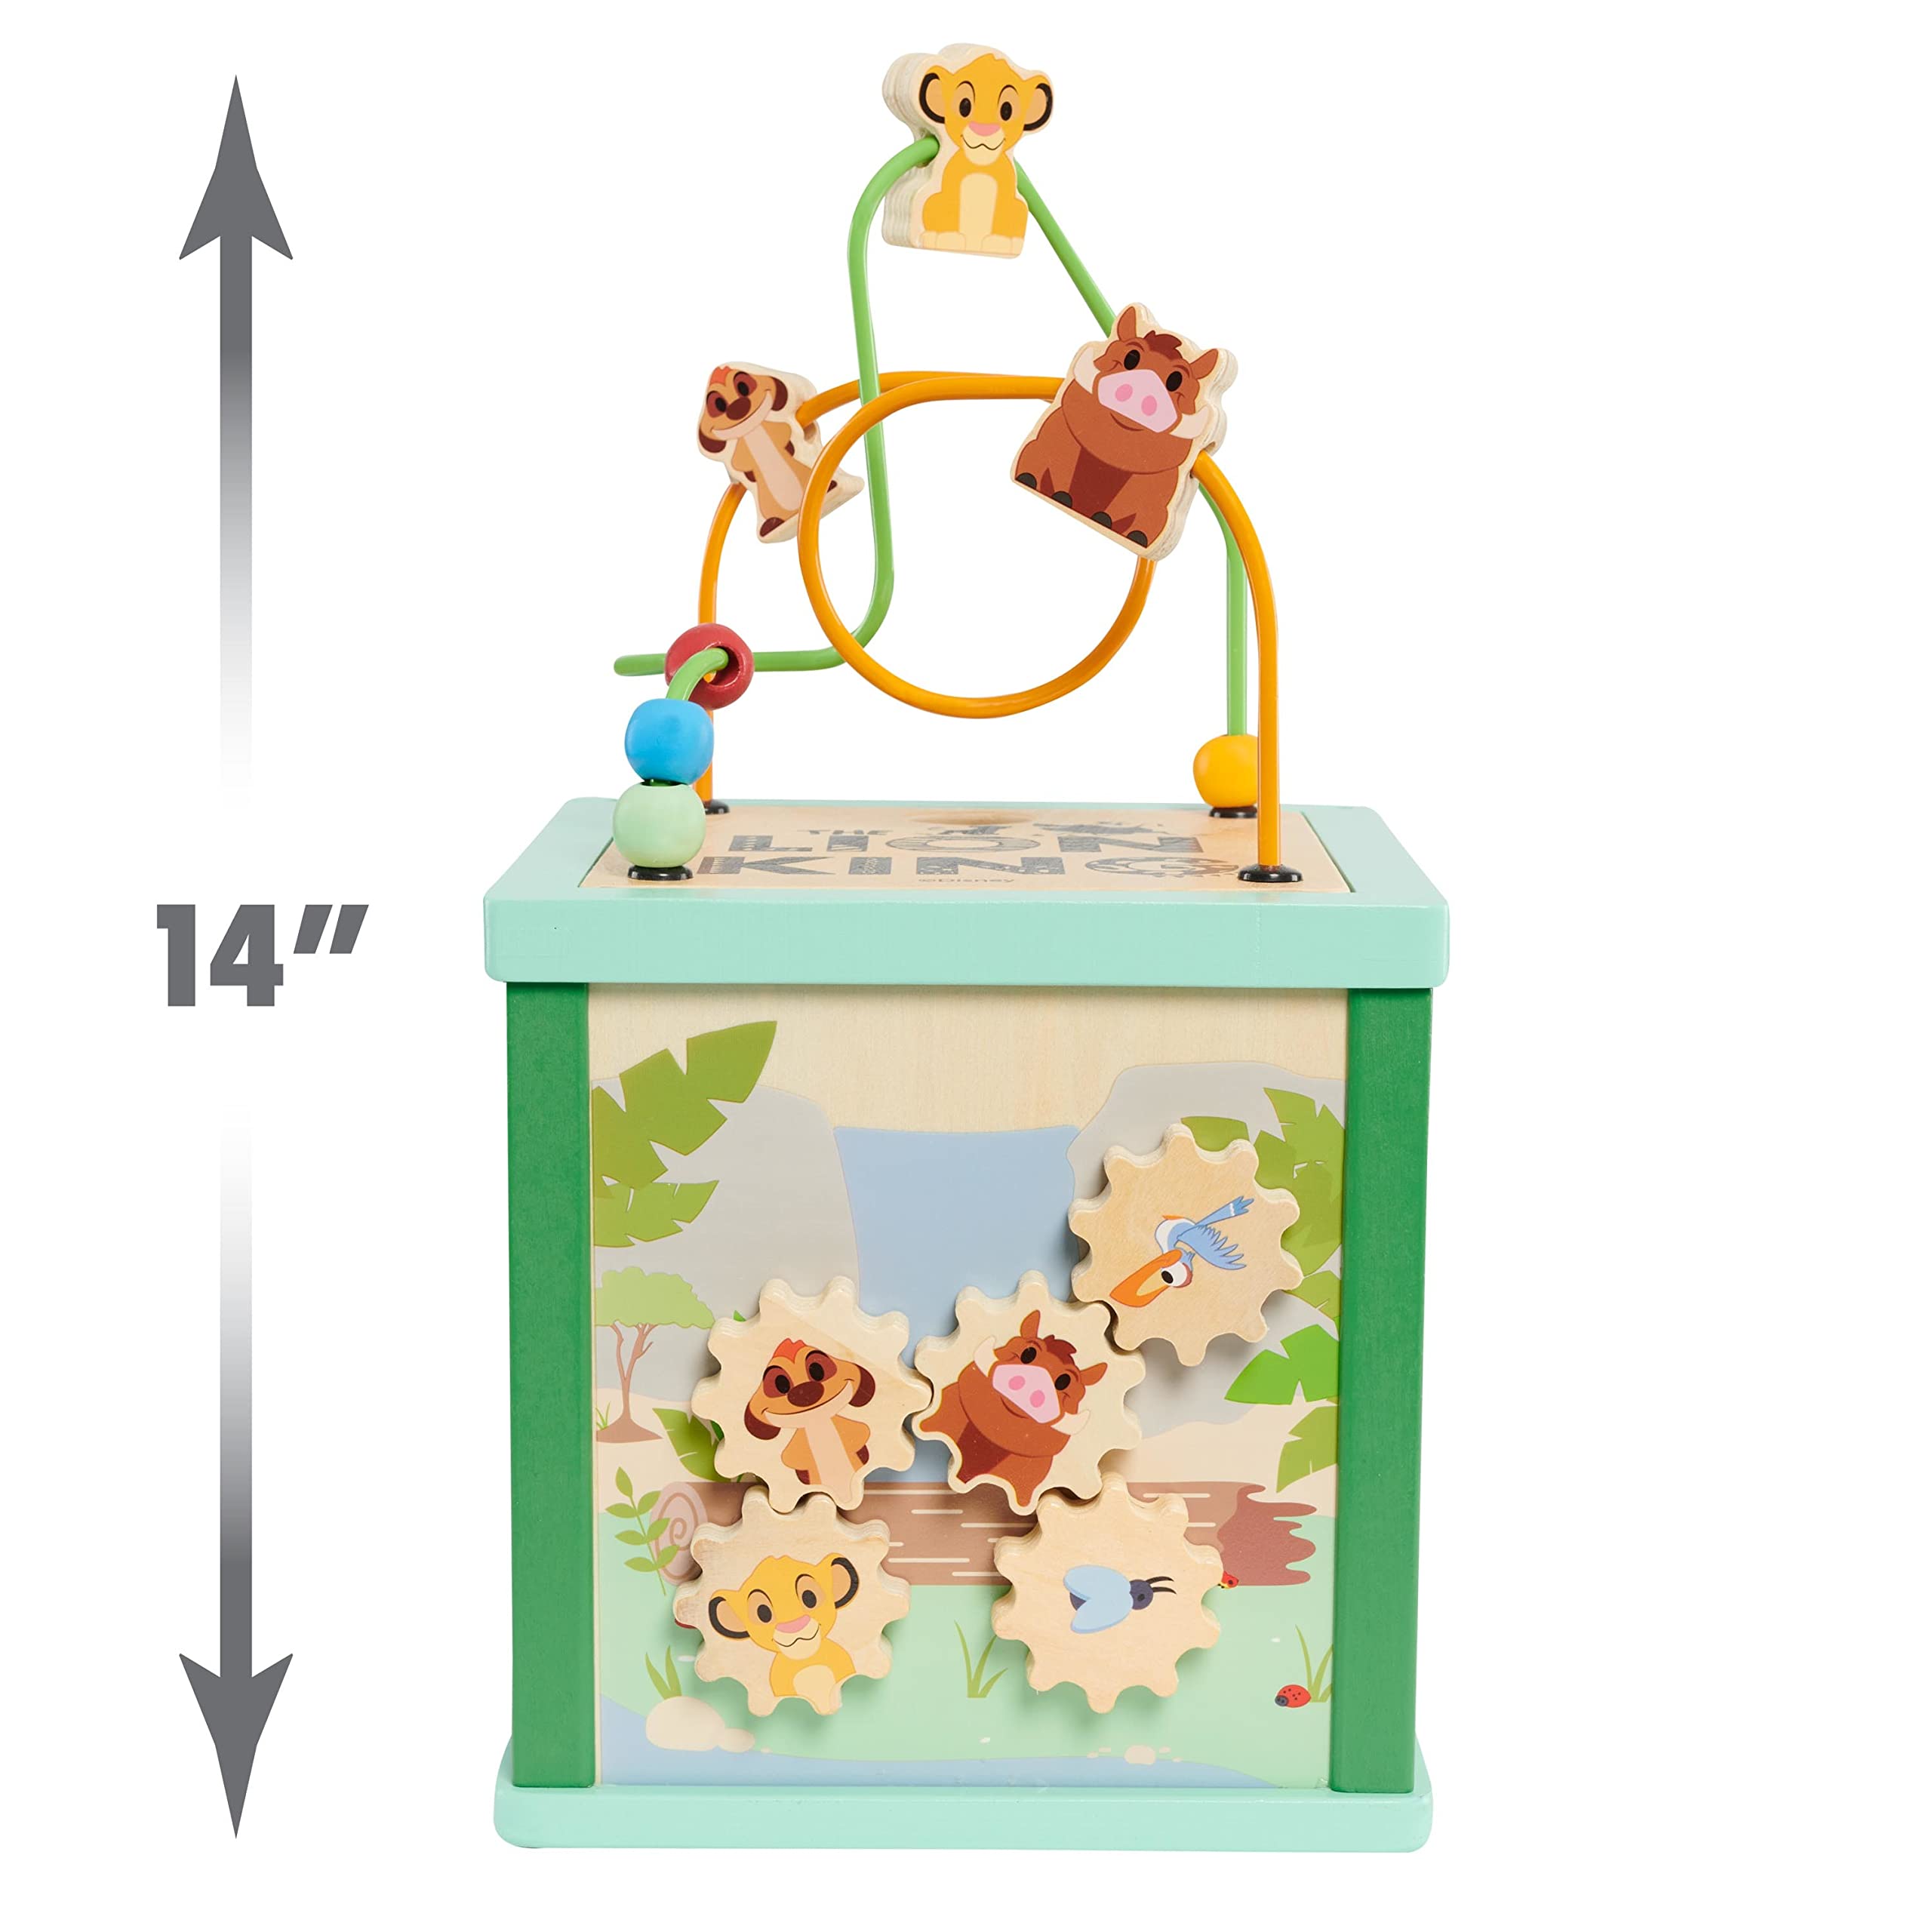 Disney Wooden Toys Lion King Activity Cube, Kids Toys for Ages 2 Up, Gifts and Presents by Just Play